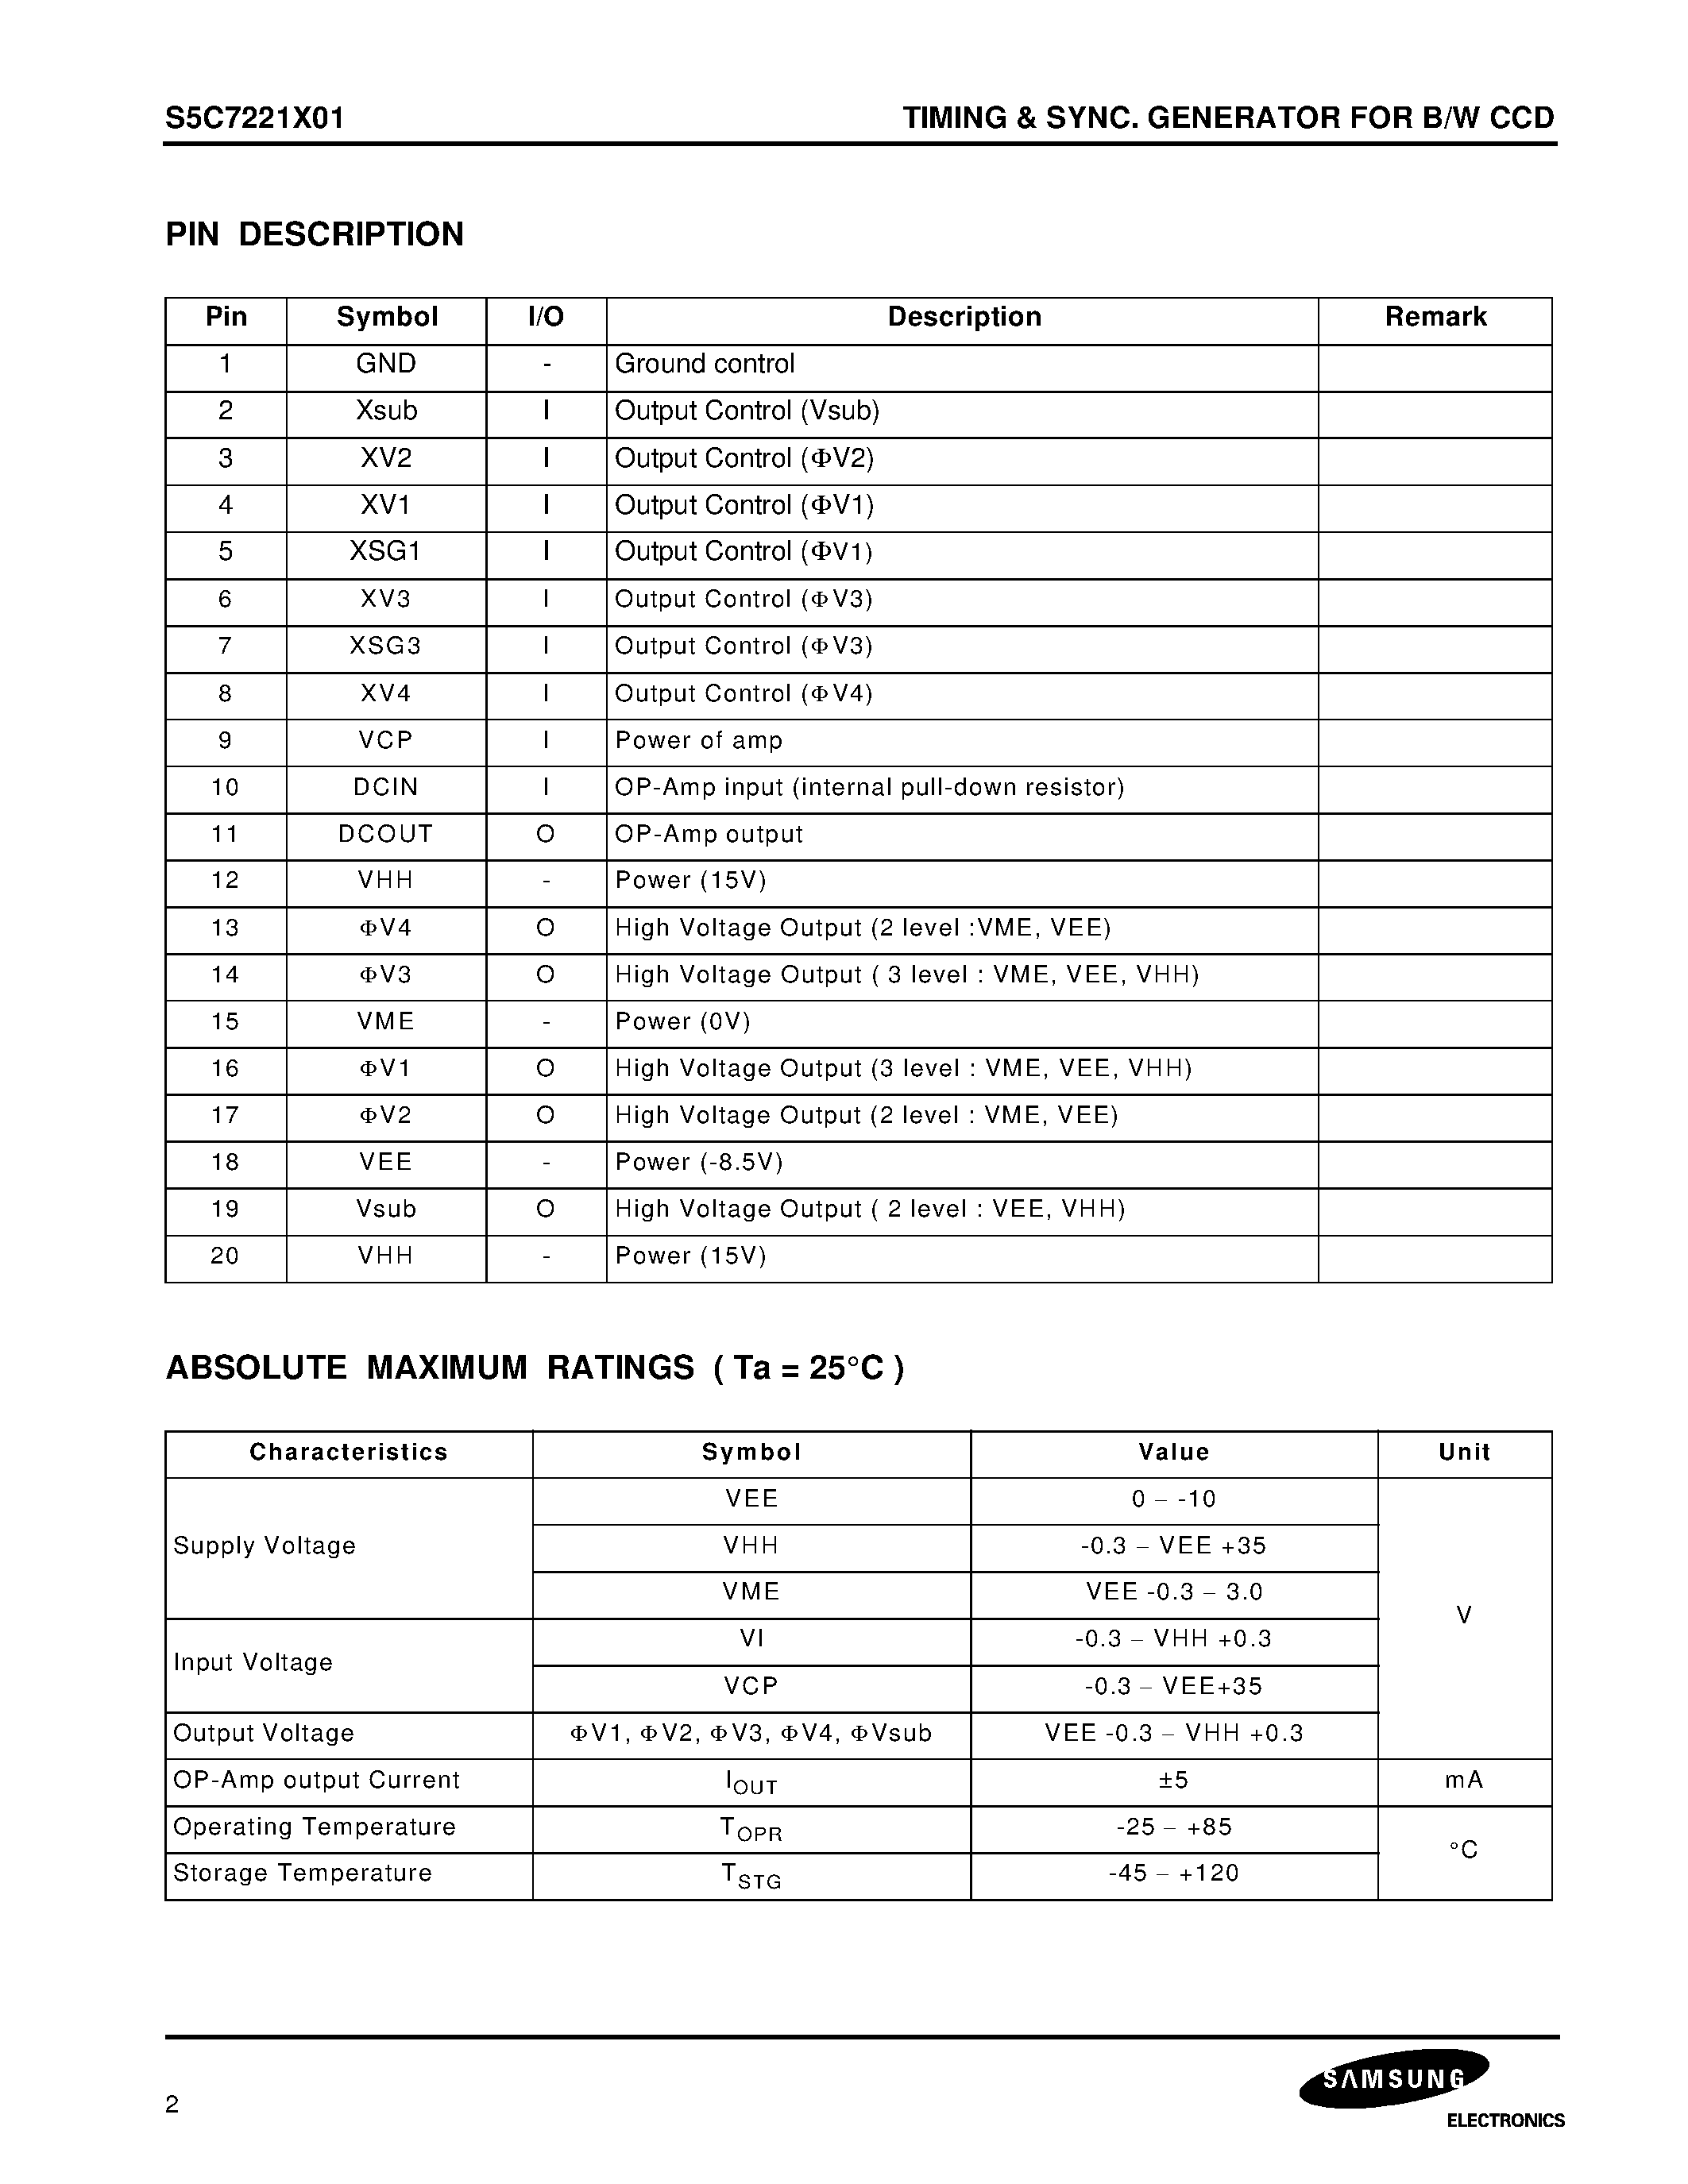 Datasheet S5C7221X01-V0T0 - TIMING & SYNC. GENERATOR FOR B/W CCD page 2